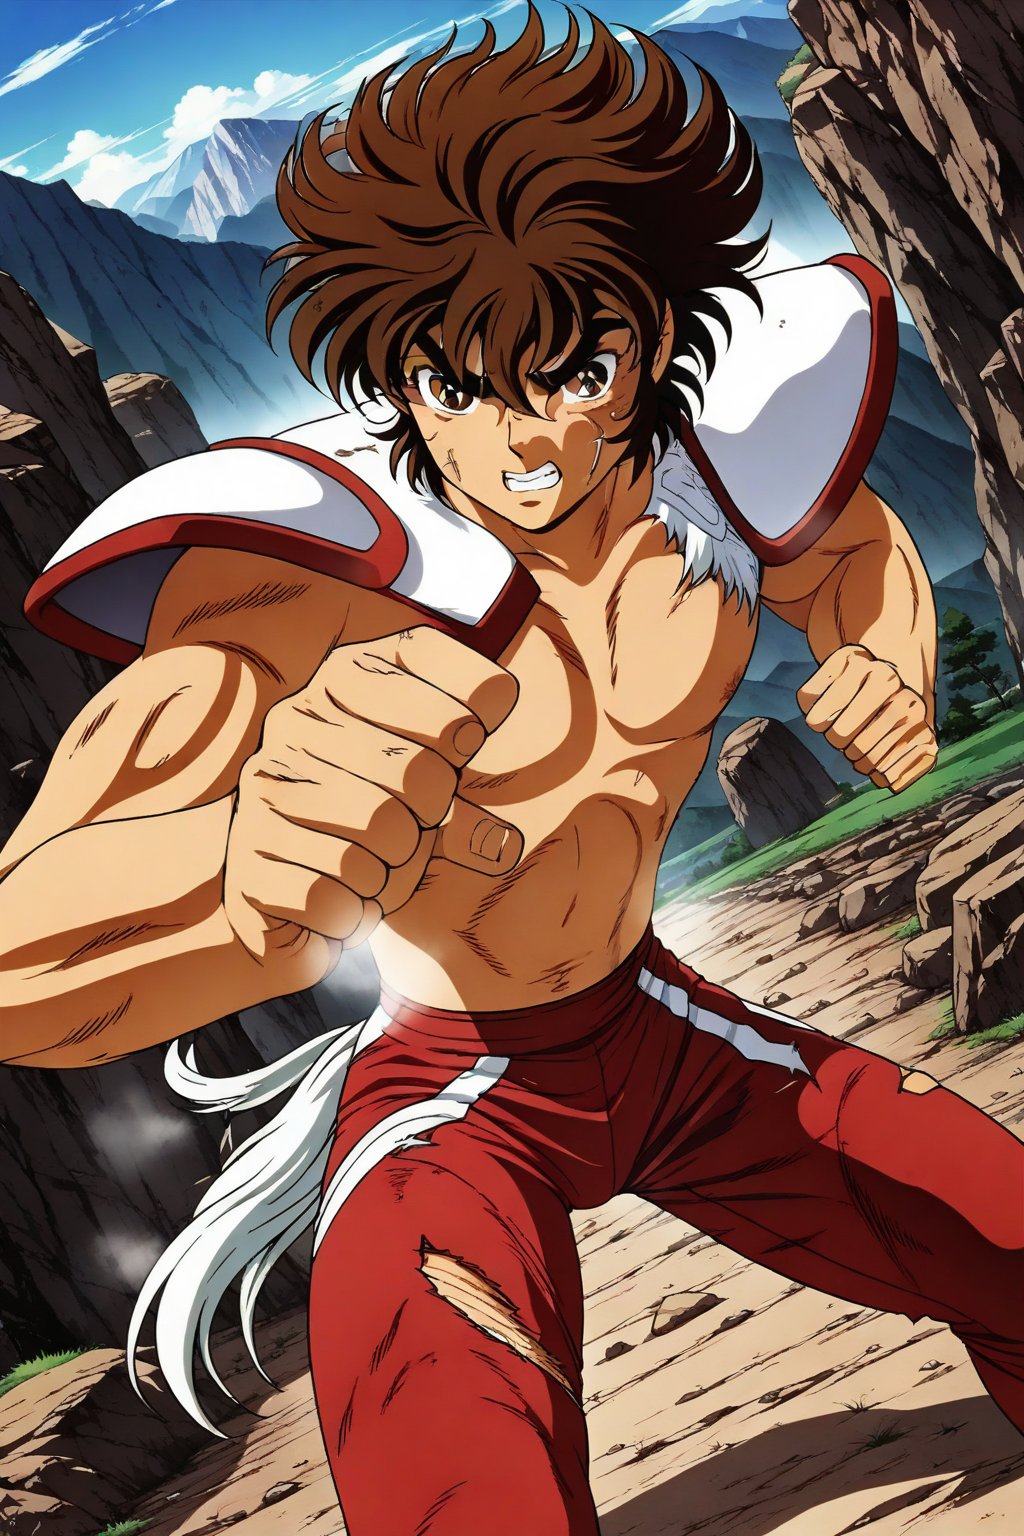 (masterpiece, best quality, ultra HD anime quality, super high resolution, 1980s/(style), retro, anatomically accurate, perfect anatomy), (front, bottom angle), looking at the camera, (Seiya Pegasus, male, (Pegasus cloth, slightly damaged)), 1 male, solo, brown hair, short hair, bangs between eyes, messy hair, brown eyes, angry face, scratch on cheek), heavy breathing, excited, (red underwear, tattered, red underwear pants, tattered), (fighting stance, standing stance, low stance, legs wide apart, one foot forward), (mountain scenery, mountain path, barren land, large rocks, cliff), score_9, score_8_up, score_7_up, score_6_up,Seiya Pegasus,Anime